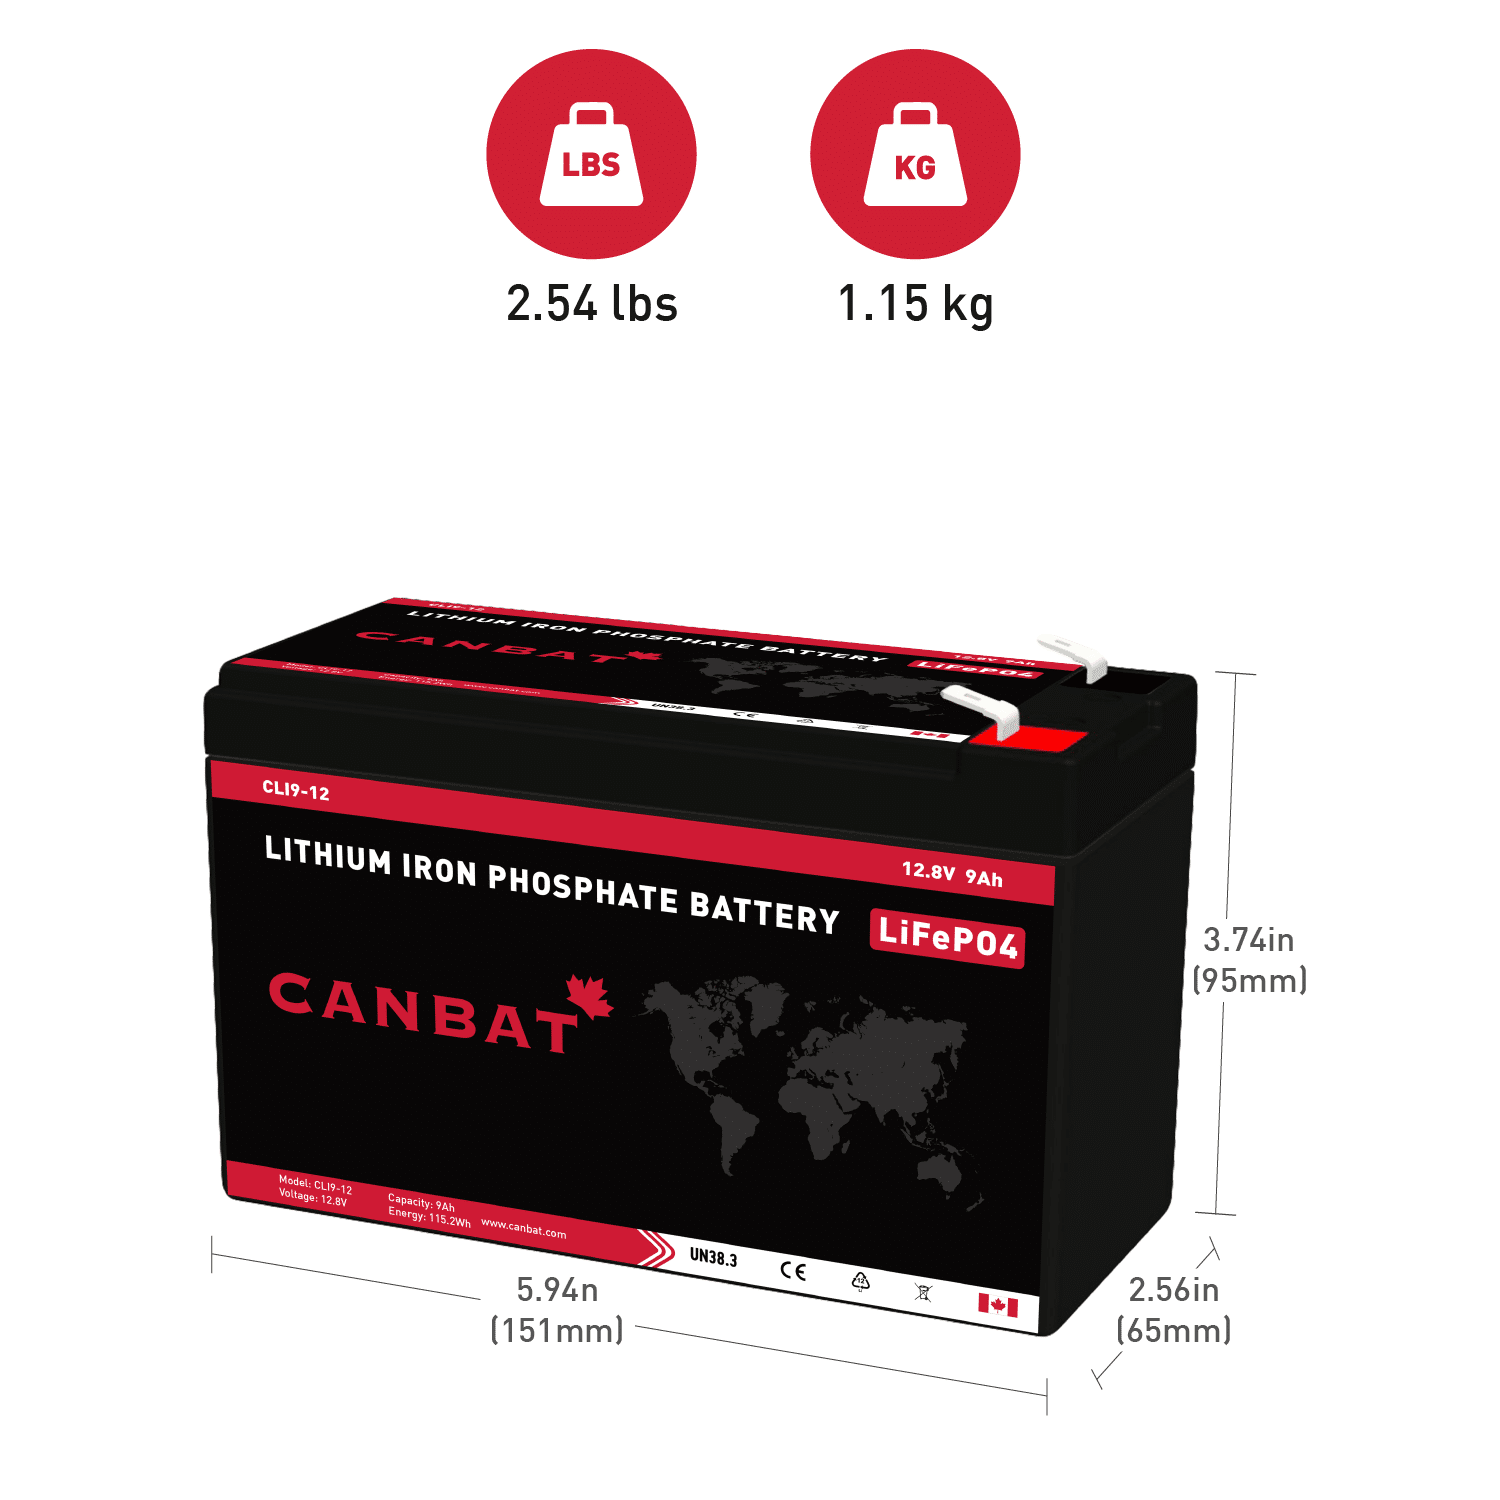 Canbat 12V 9Ah Lithium Battery Dimensions and Weight